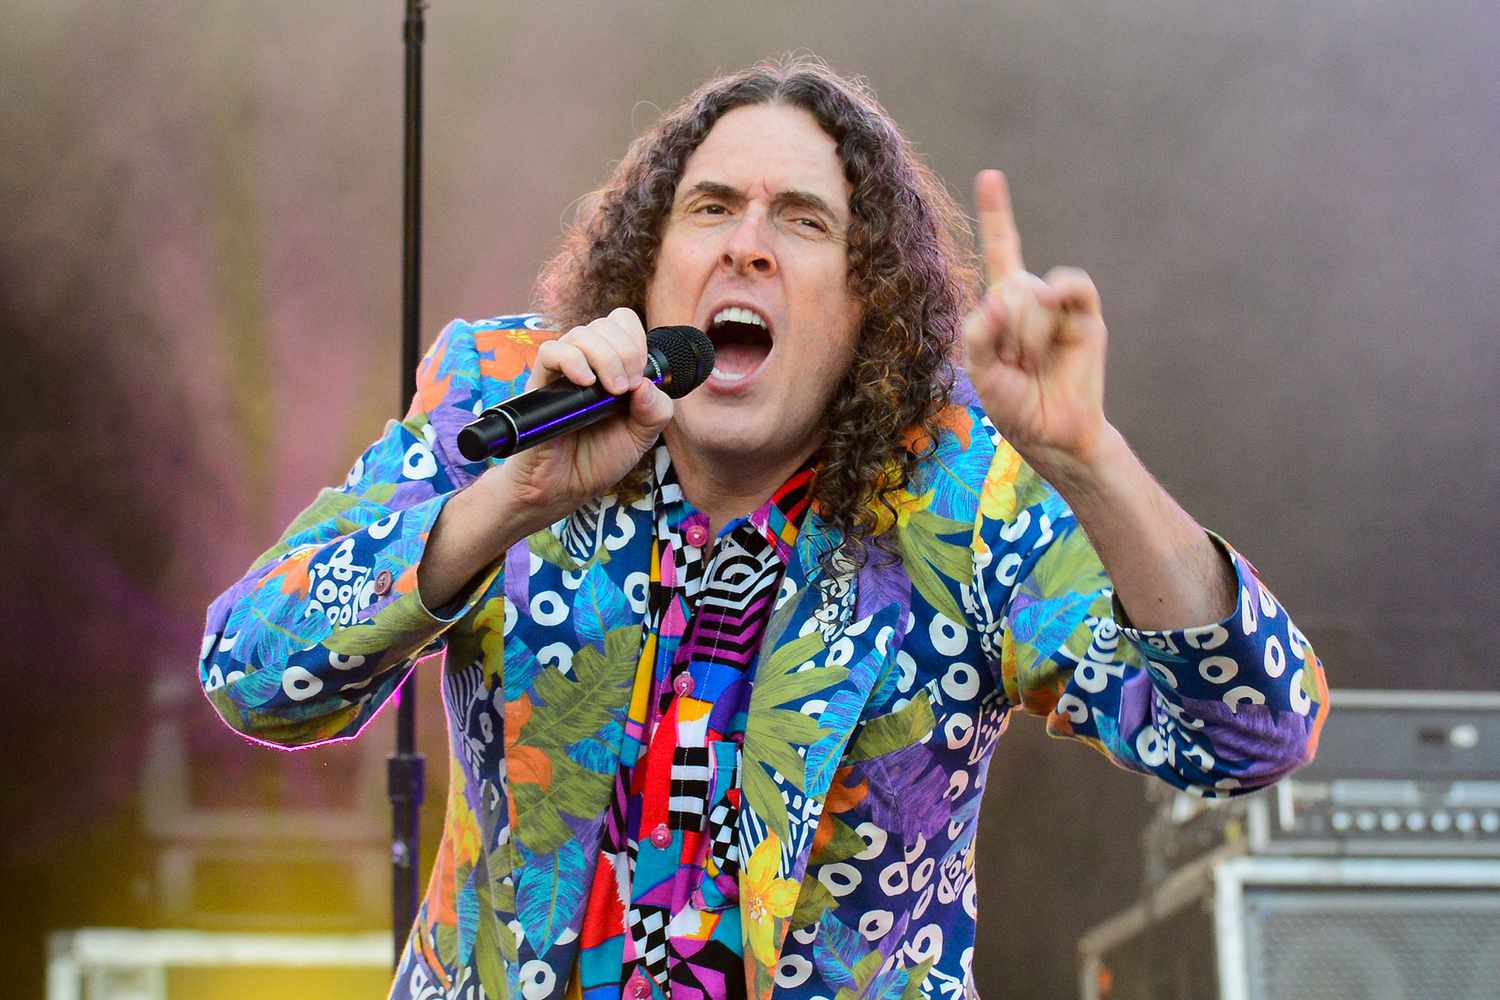 Eat these! The 3 best Weird Al songs 